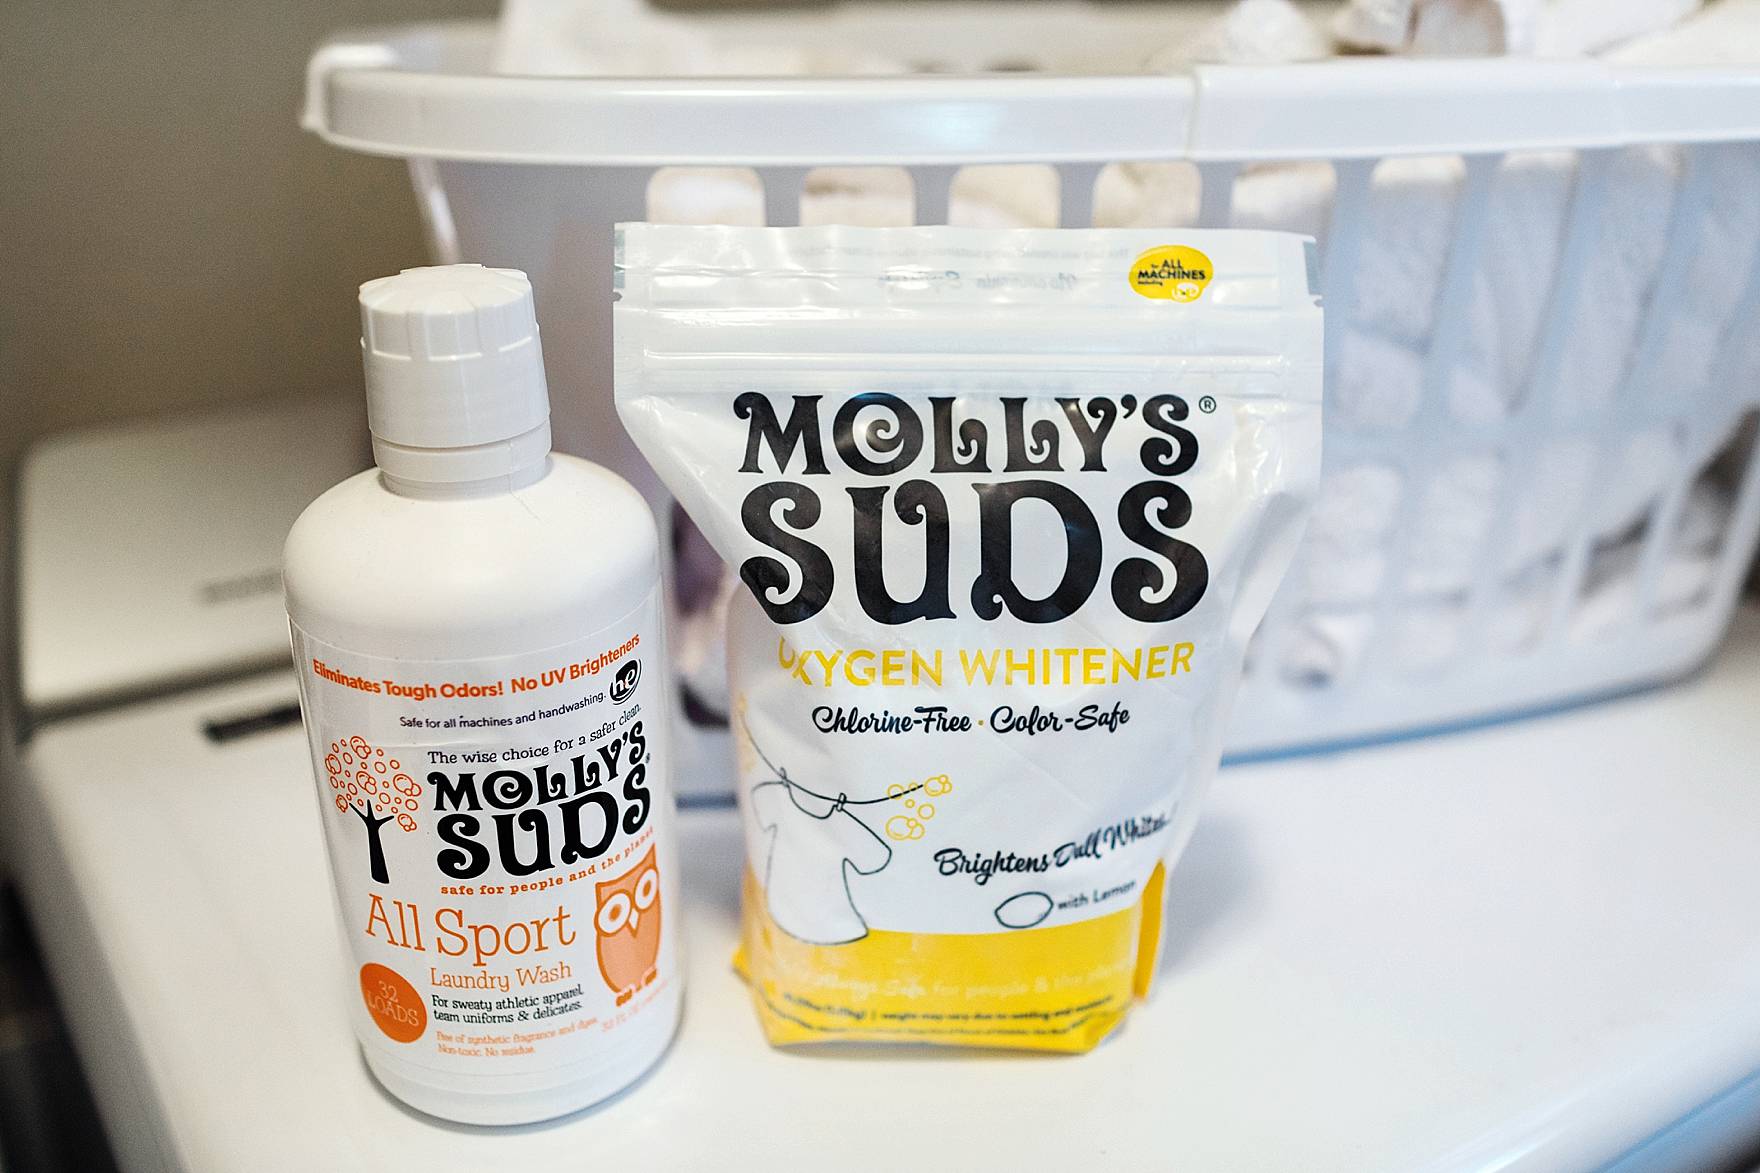 Molly’s Suds: All Sport Laundry Wash, Oxygen Whitener